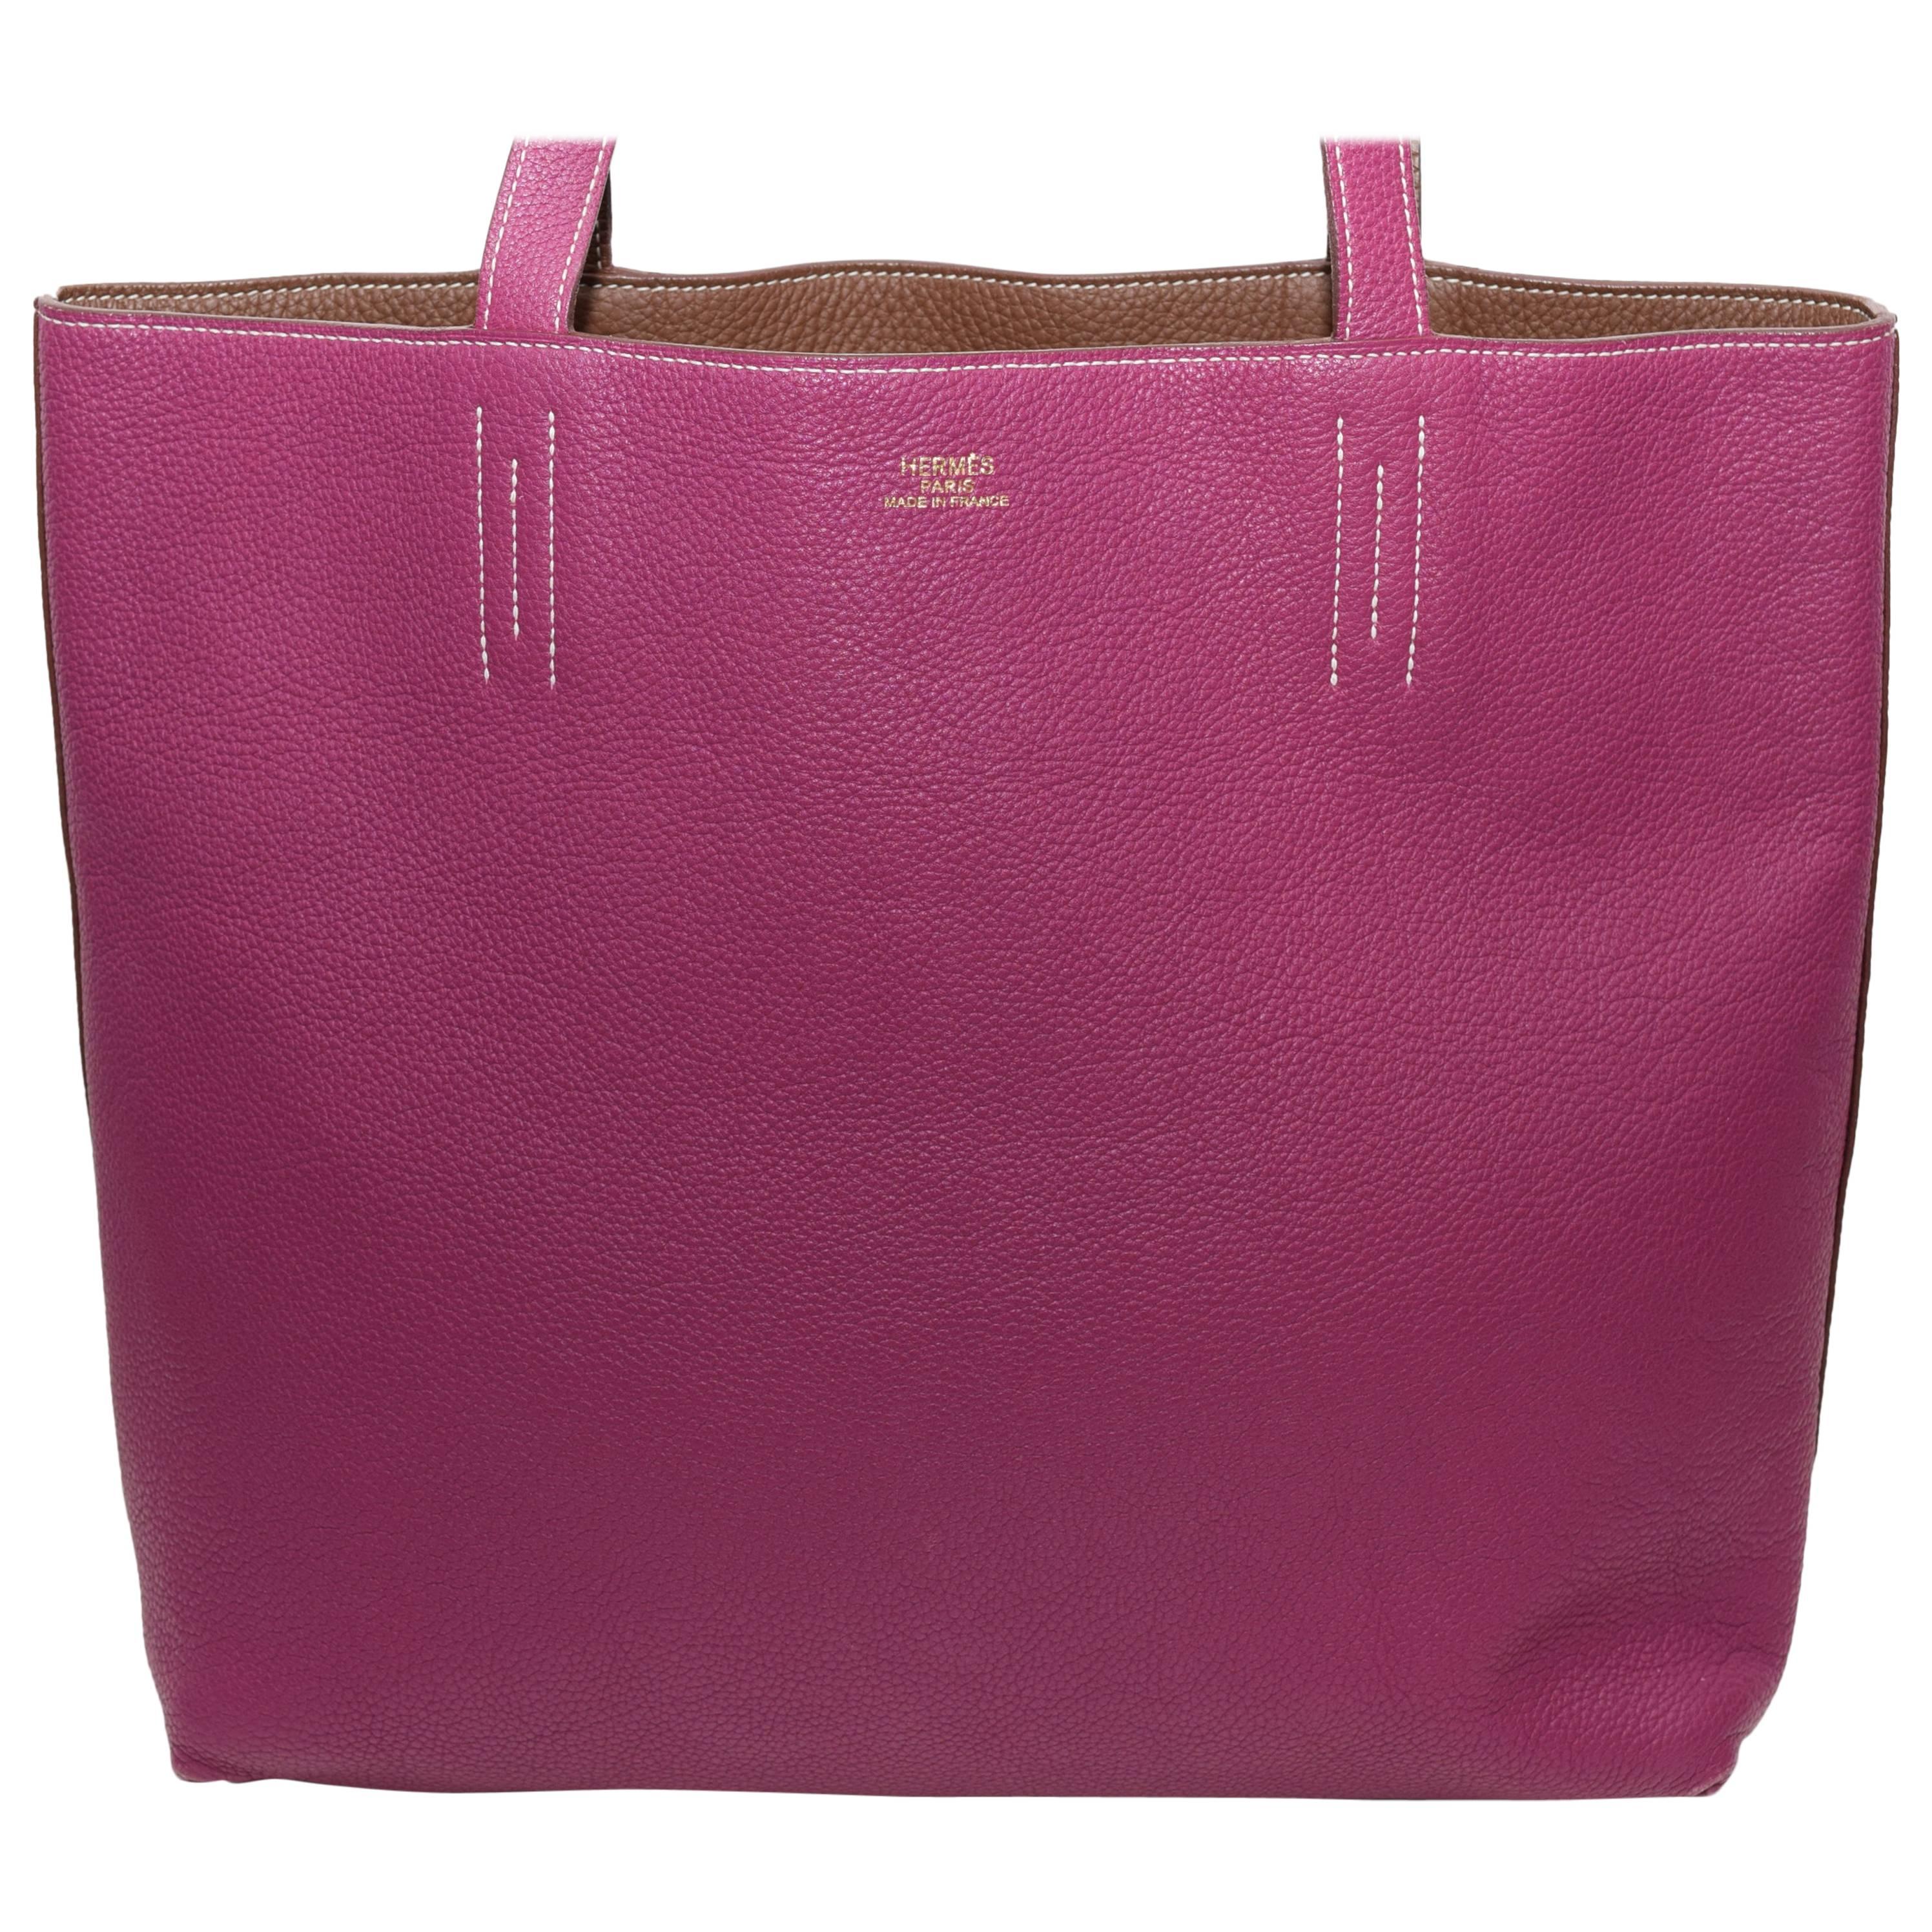 Hermes 2013 Tosca Pink & Brown Reversible Leather Double Sens Tote Bag For Sale